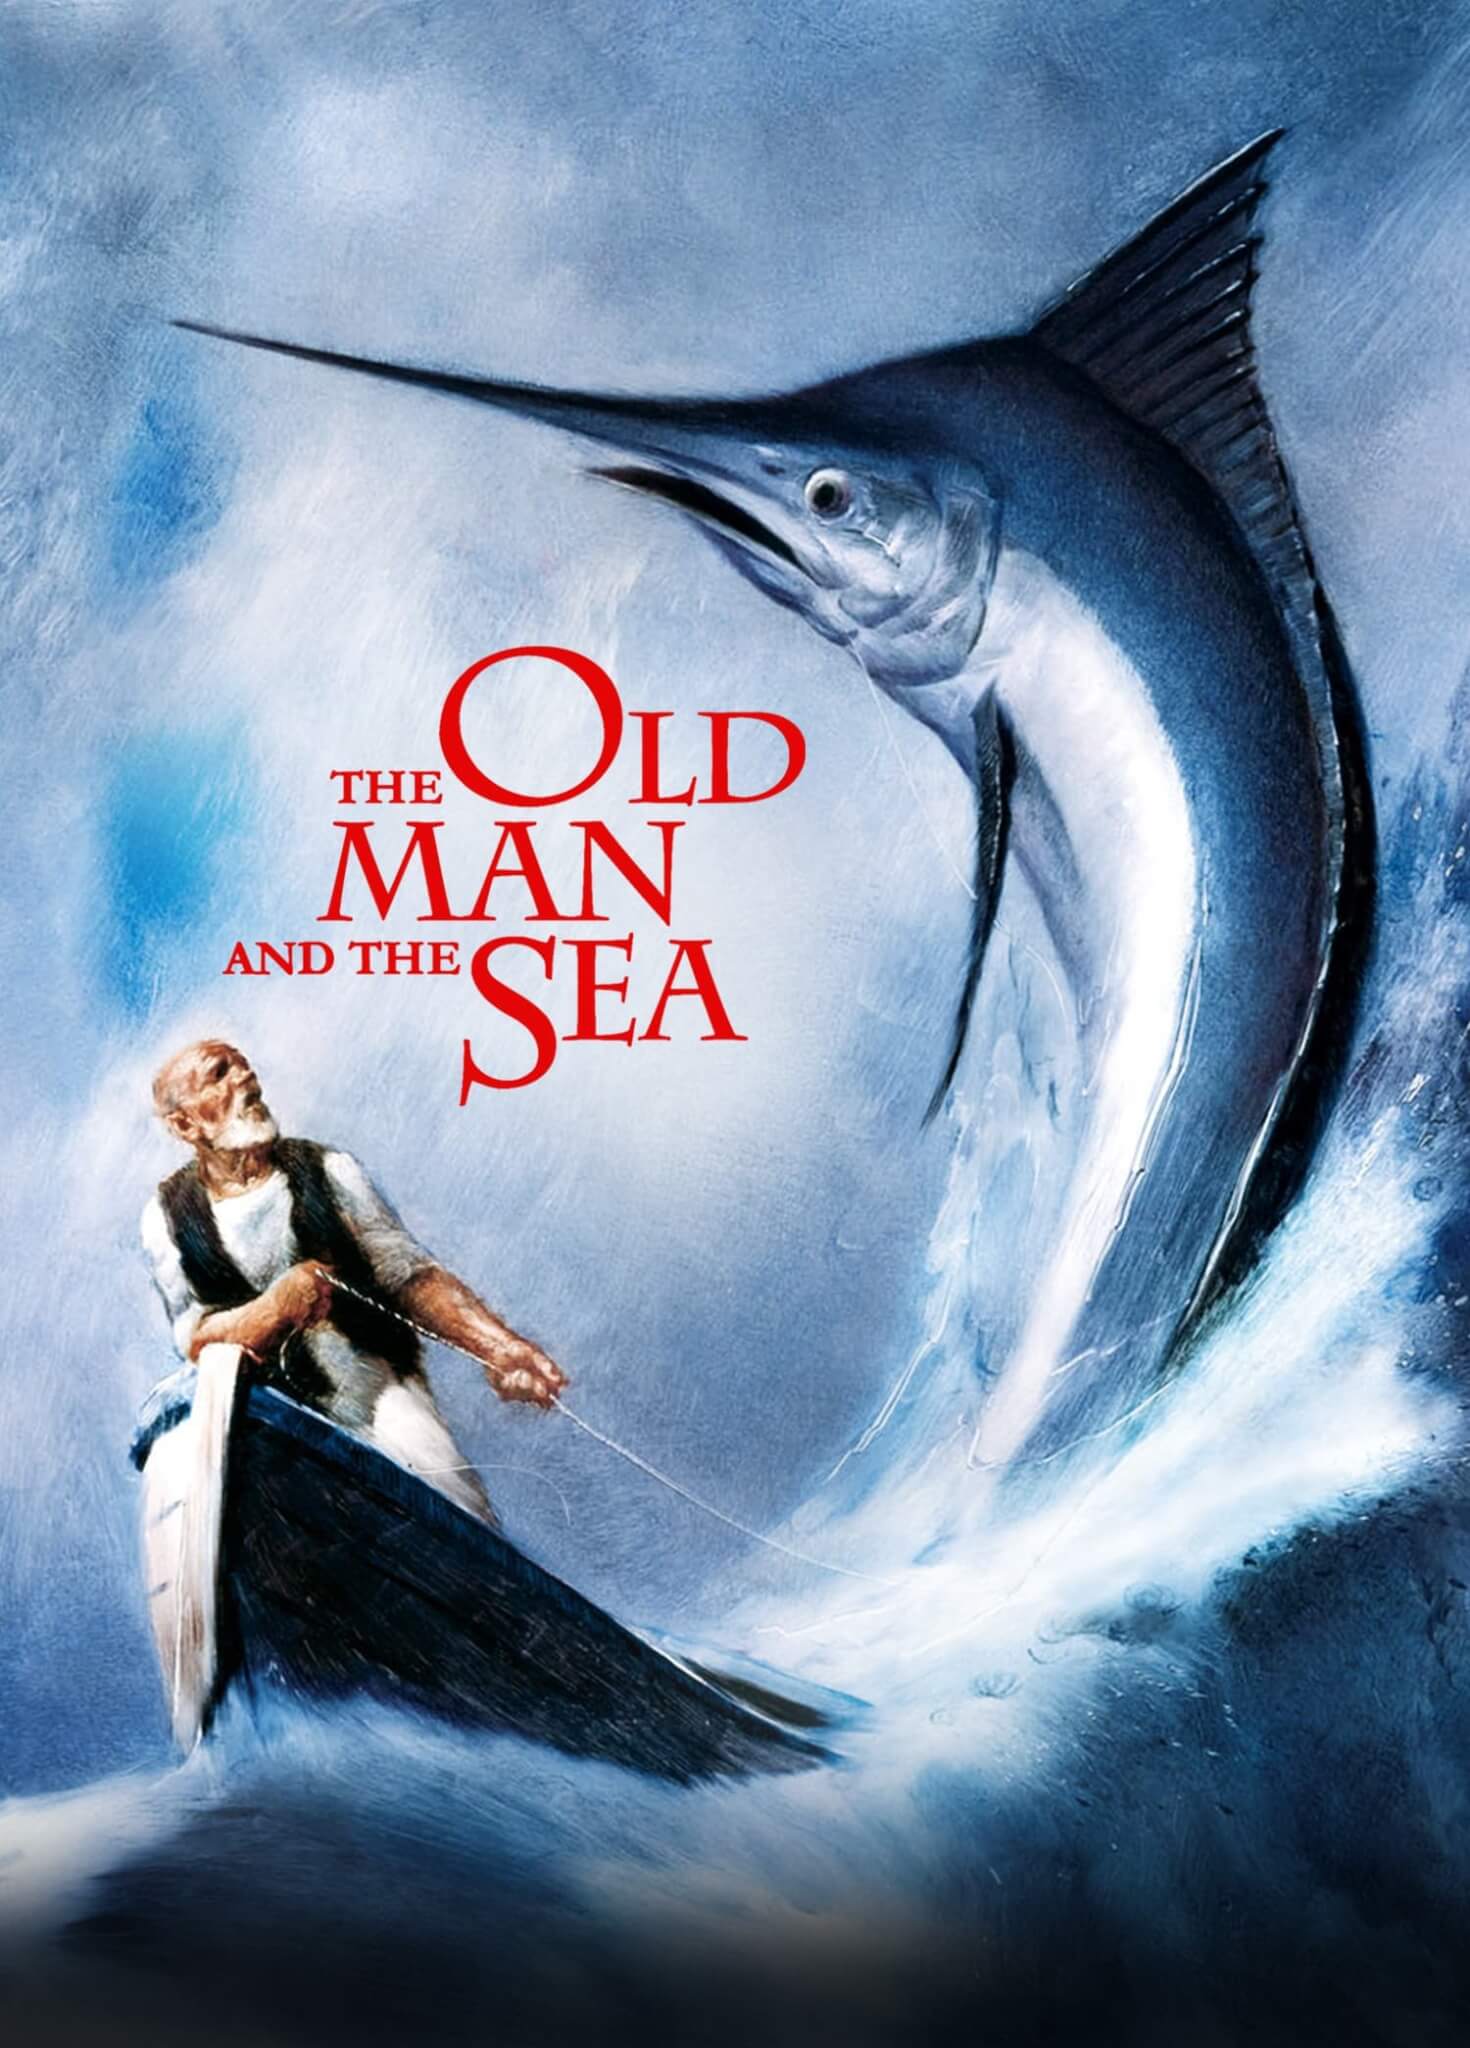 Book Summary & Review: The Old Man & the Sea by Hemingway